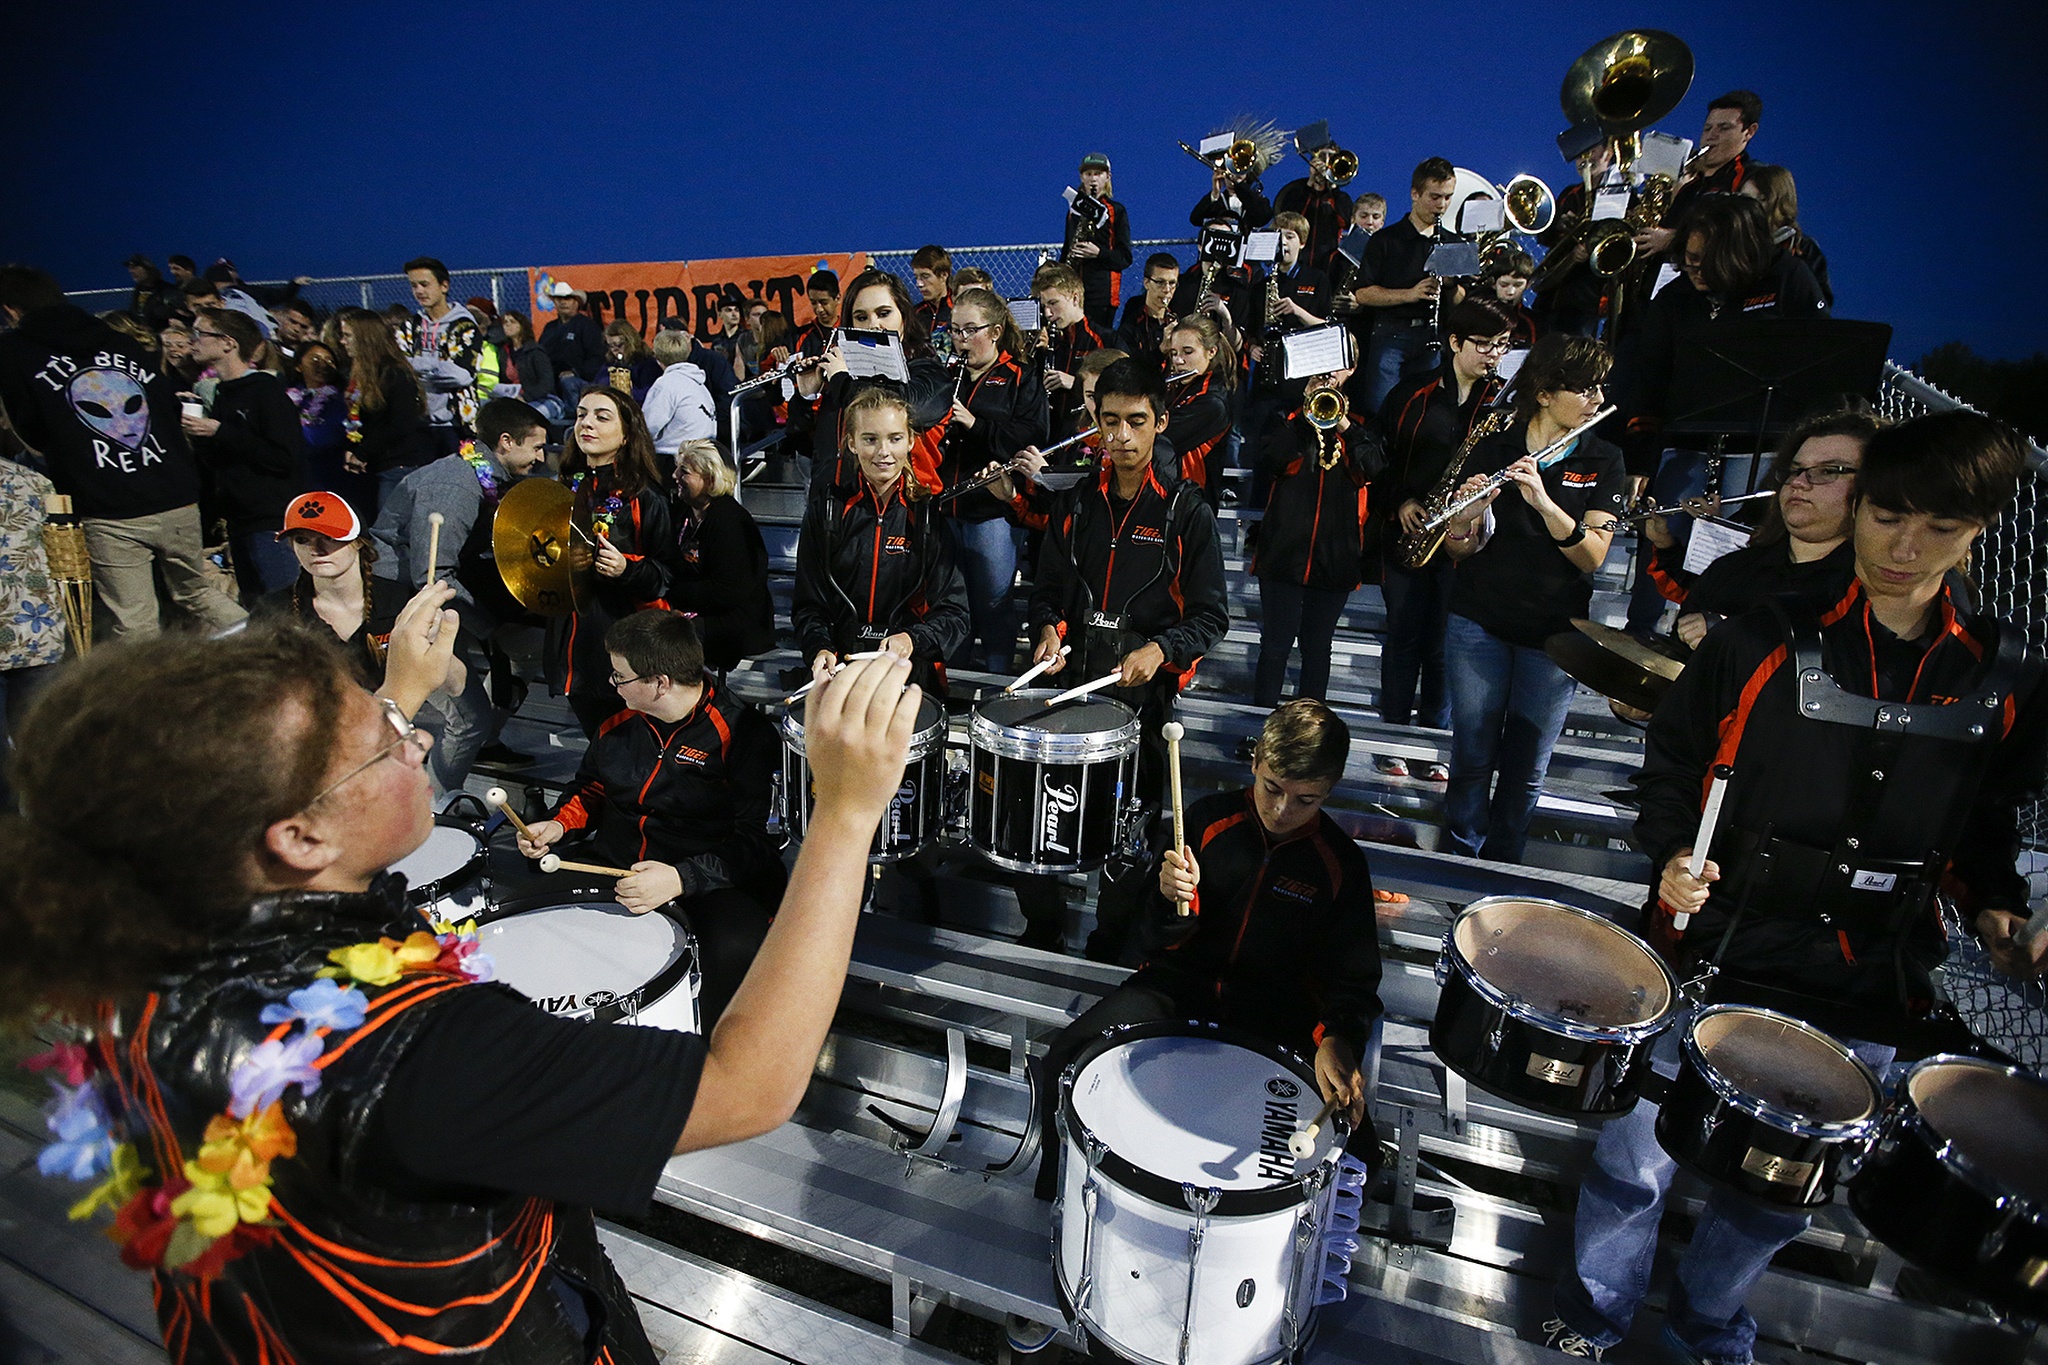 Sage Strecker, drum major for Granite Falls High School, leads the band through a quick tune during a timeout in the first quarter of a football game at the school Friday. The band, students and fans are currently using a temporary grandstand. (Ian Terry / The Herald)